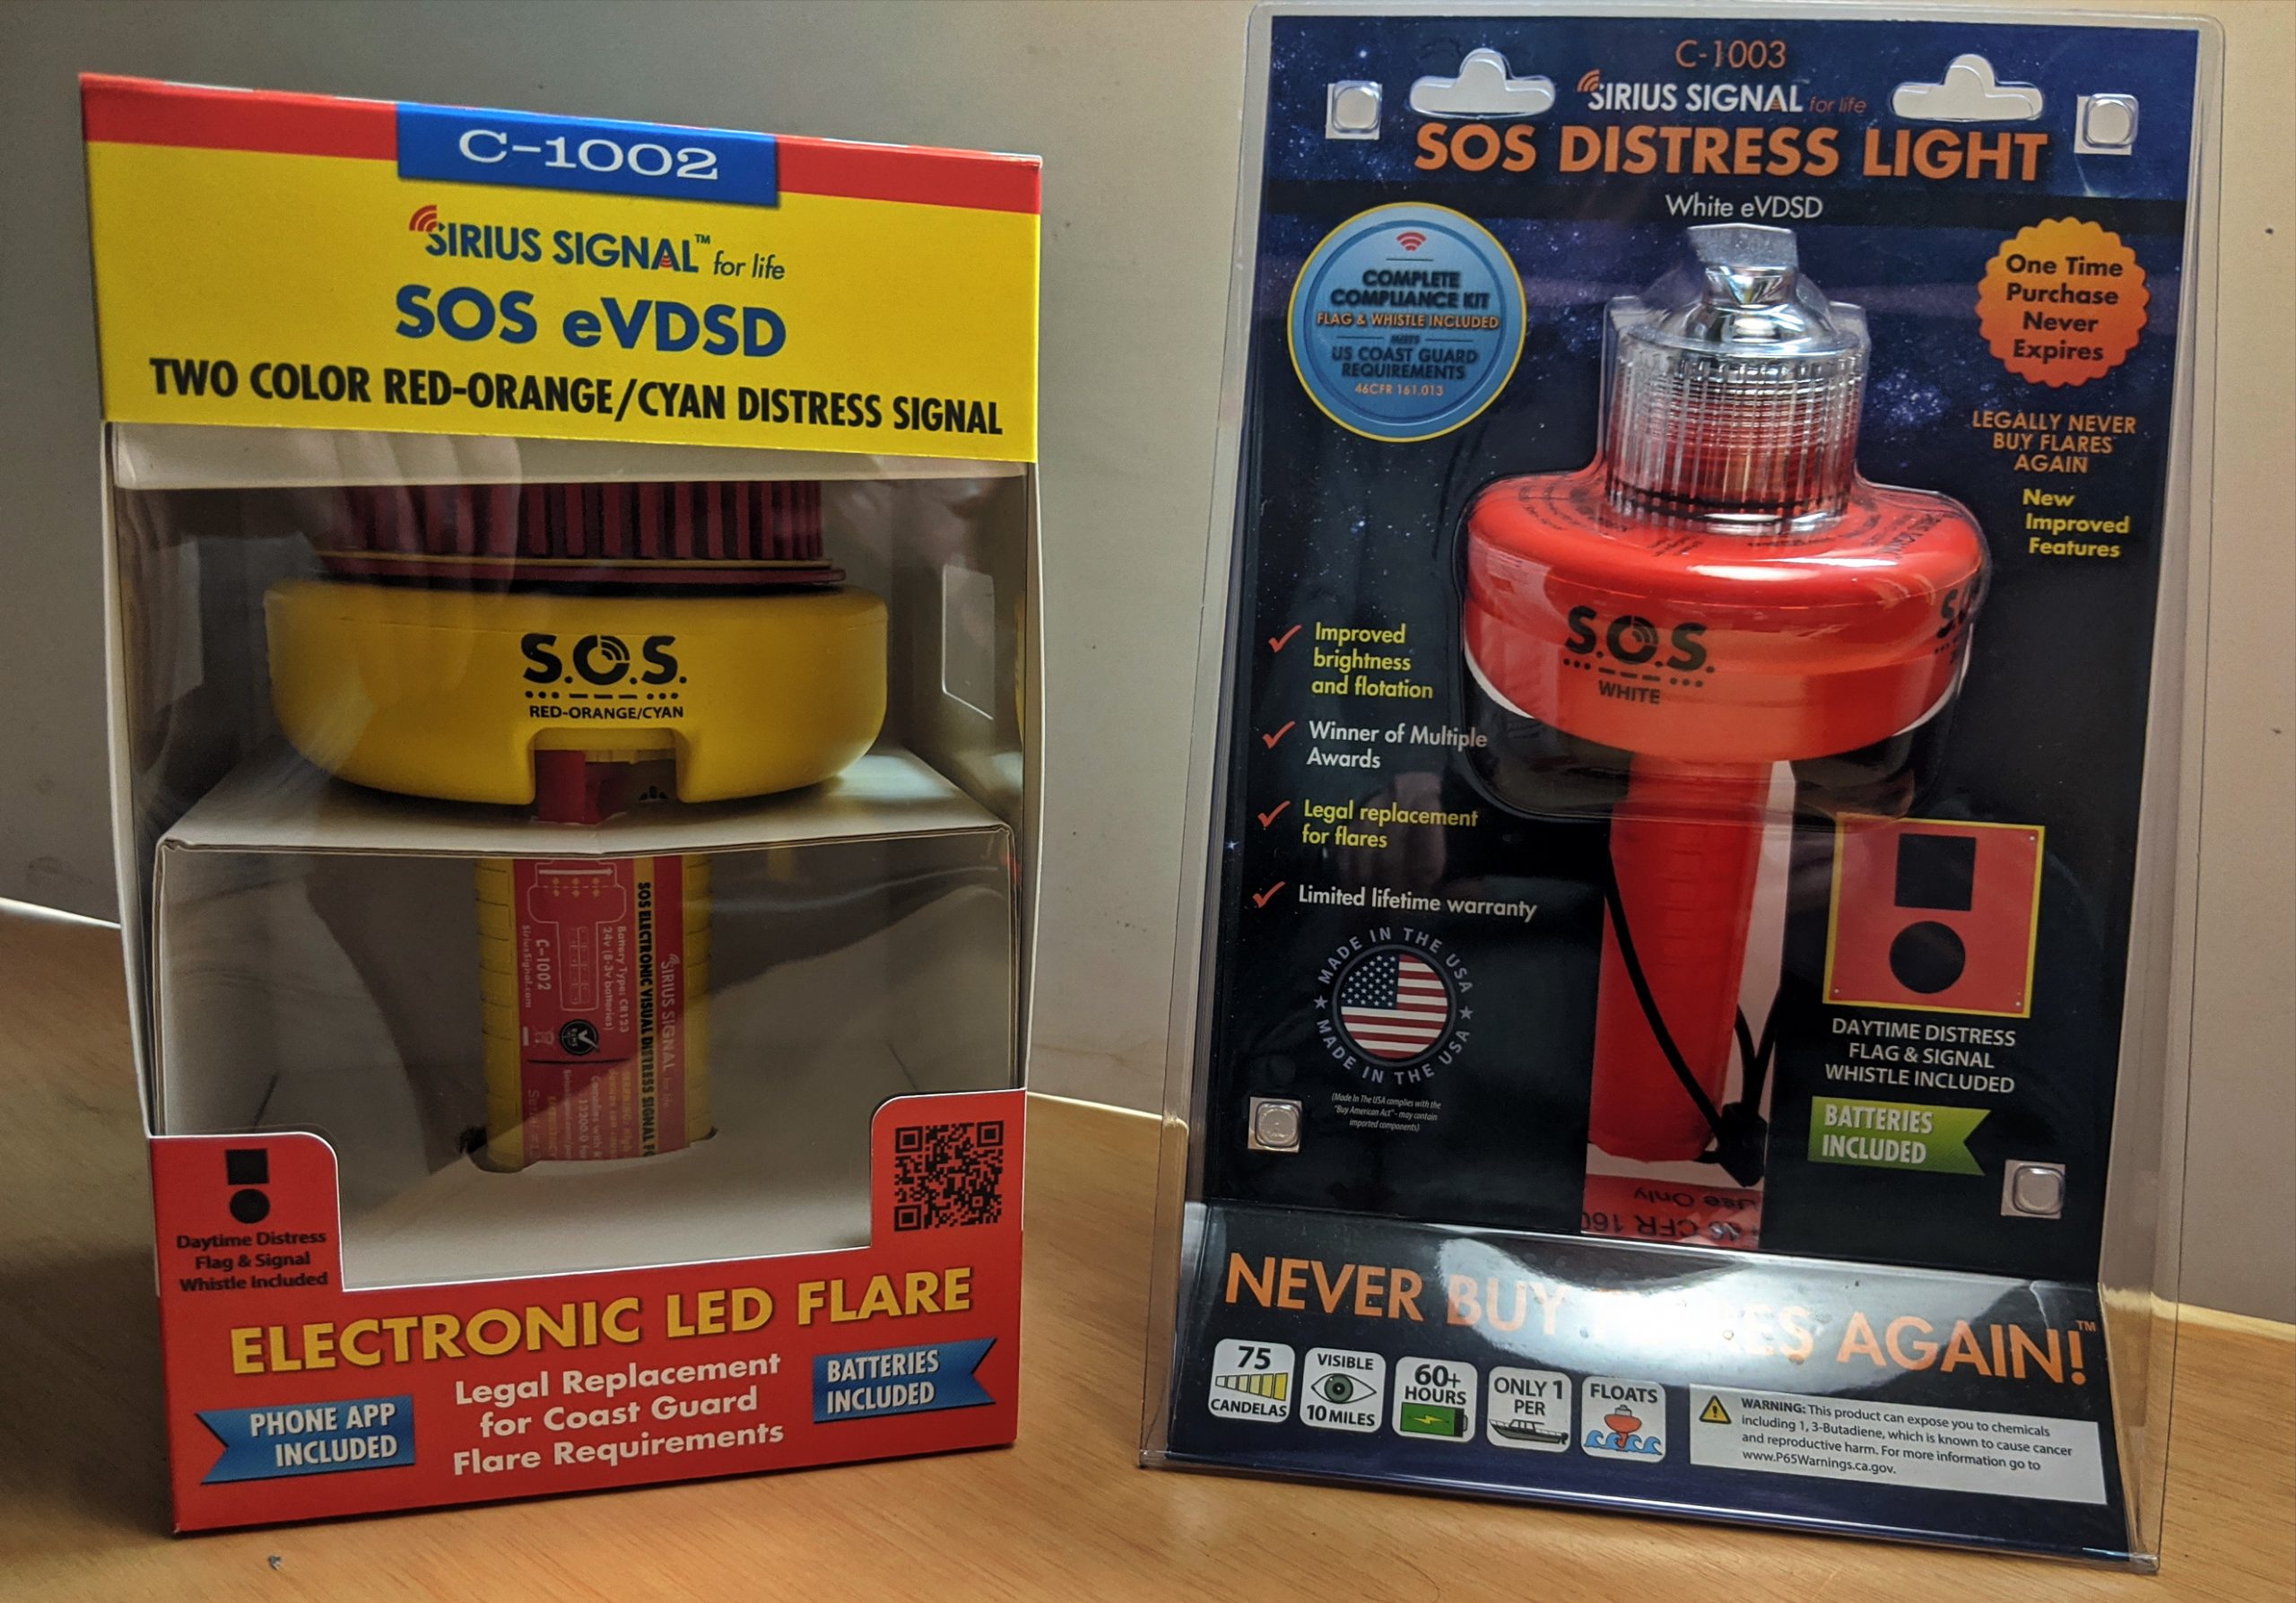 Need Flares for Your Boat? Consider the USCG Approved C-1002